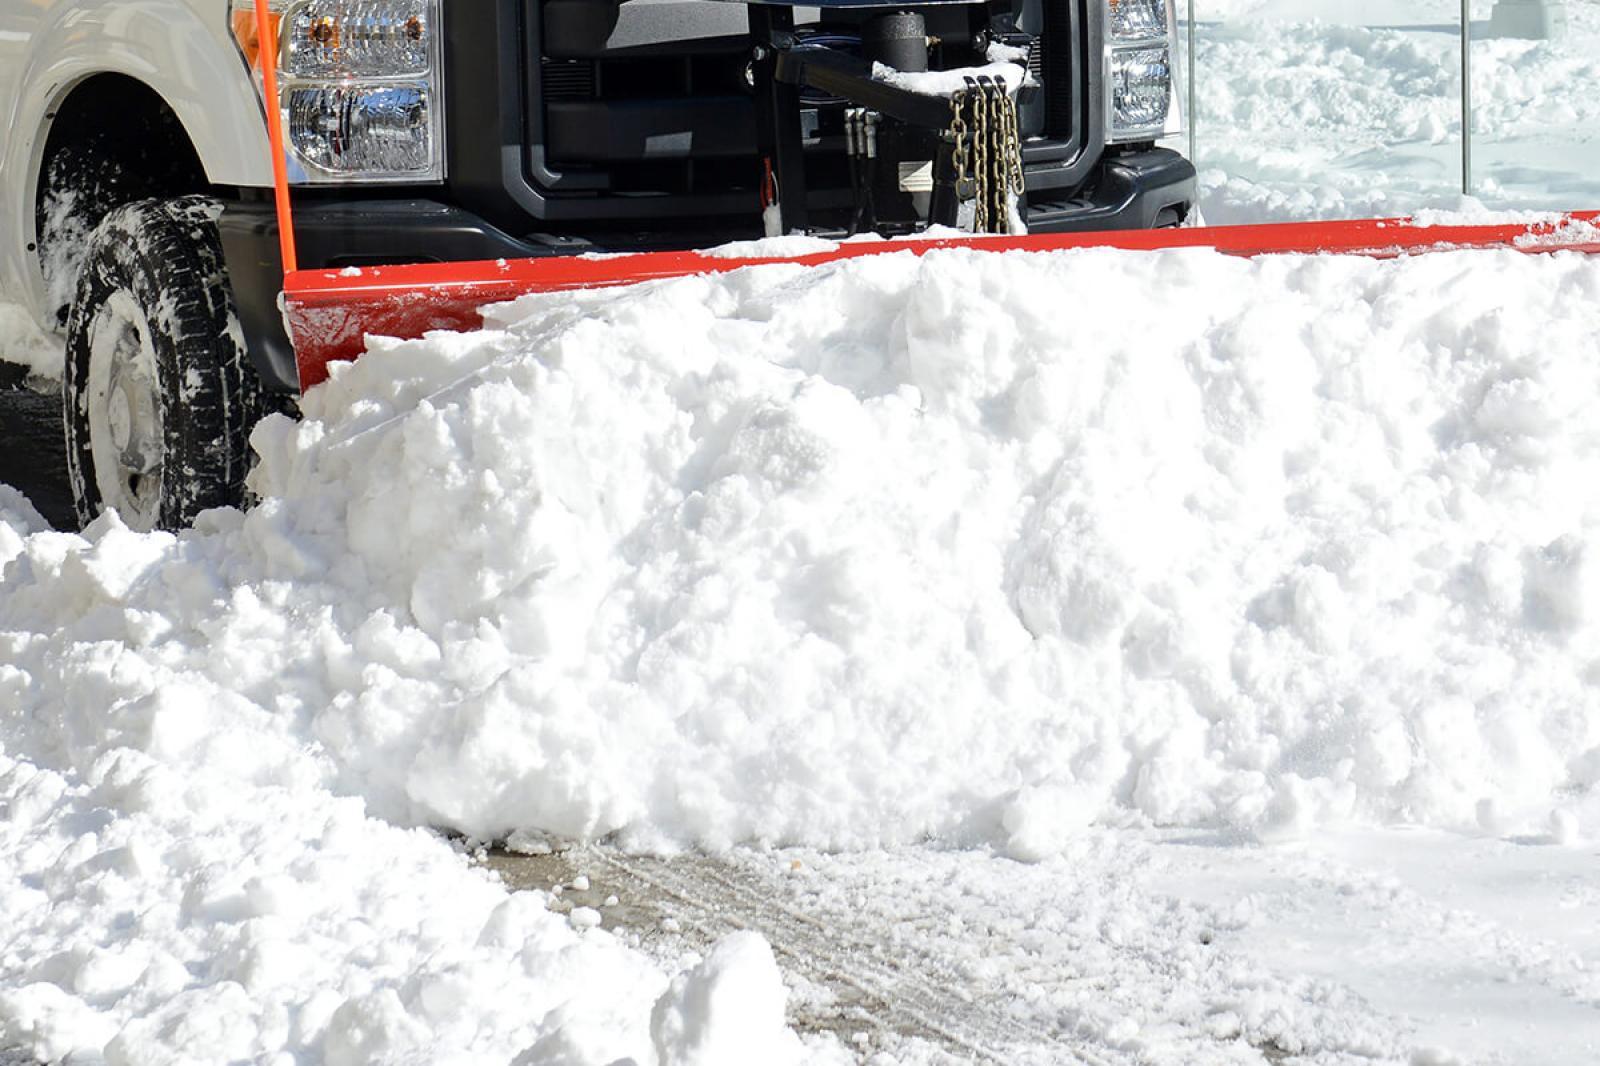 Professionalism in the snow and ice industry